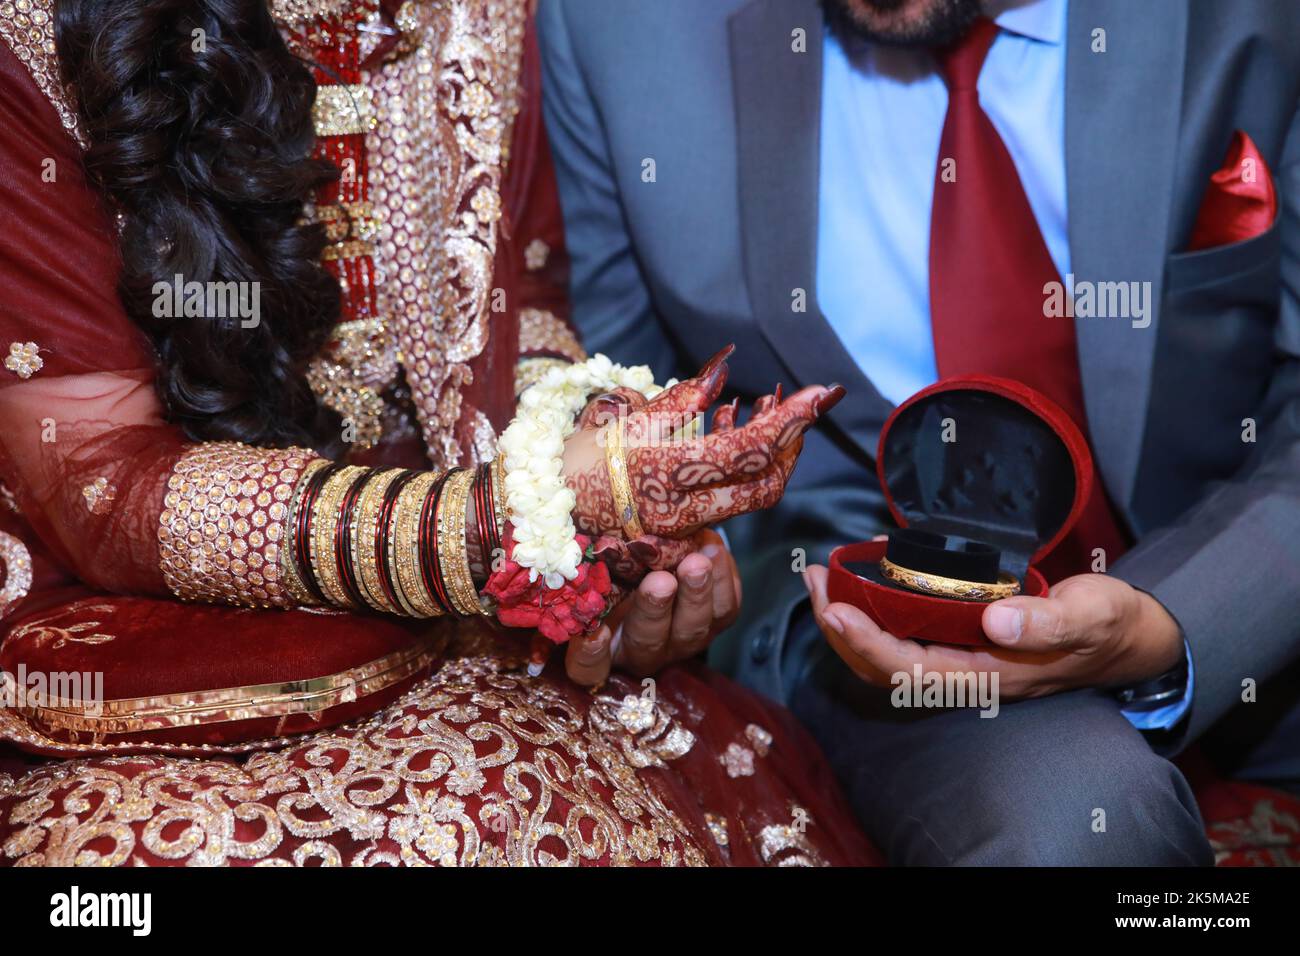 Groom presenting gift of gold bangles to bride Stock Photo